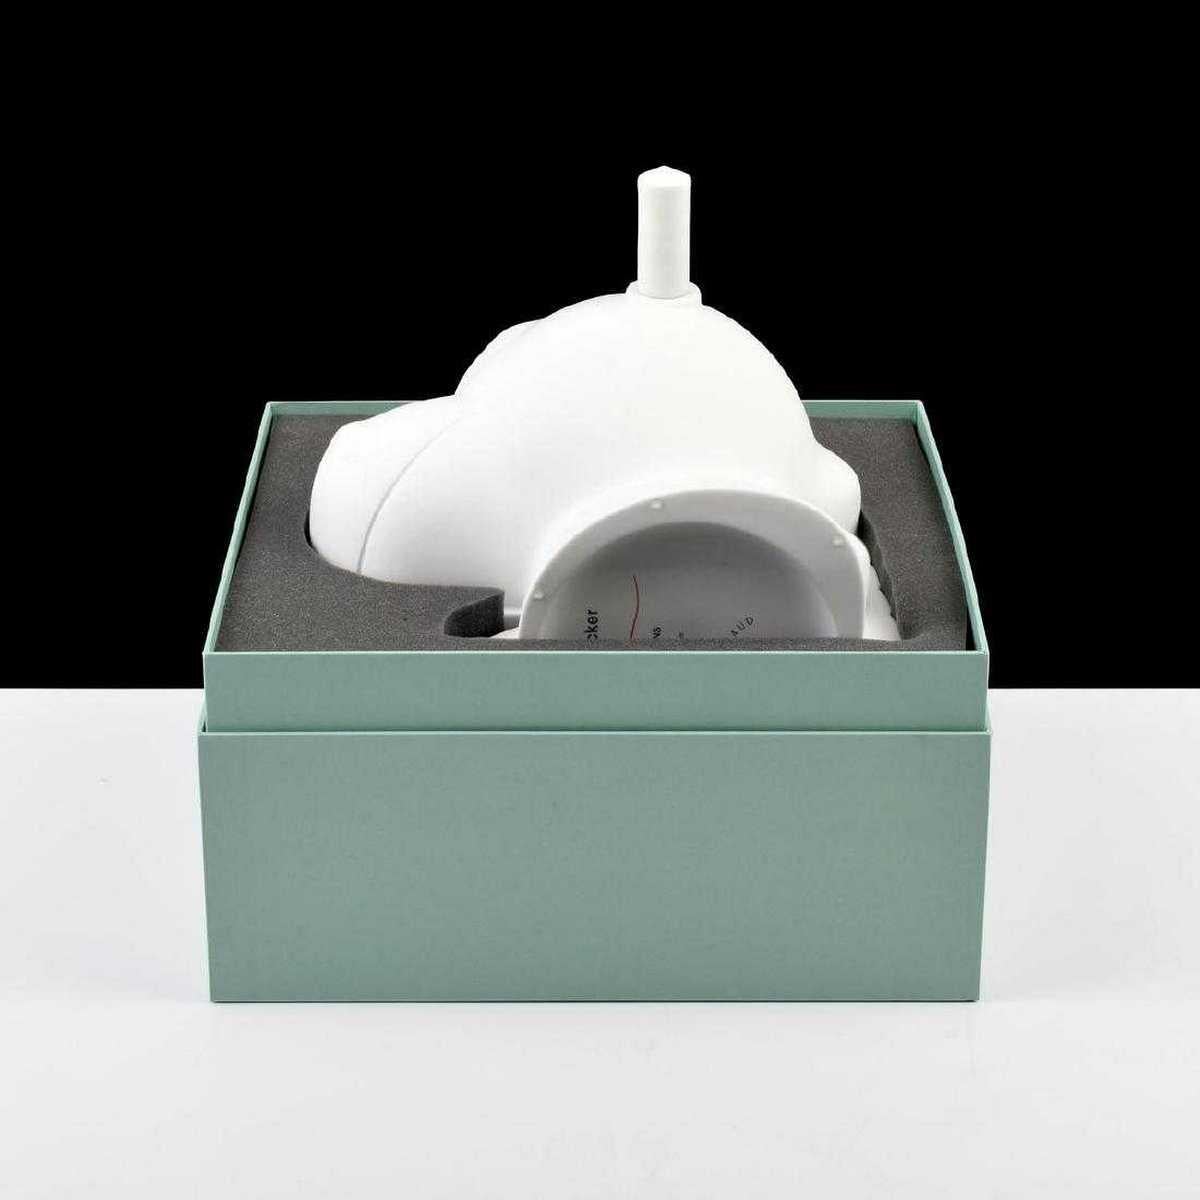 Vase by Jeff Koons (American, b. 1955) for Bernardaud. Vase is accompanied by the original presentation box, booklet and certificate, as well as handling glove. 

Markings: signed, marking(s); edition of 3500; 2012.

 